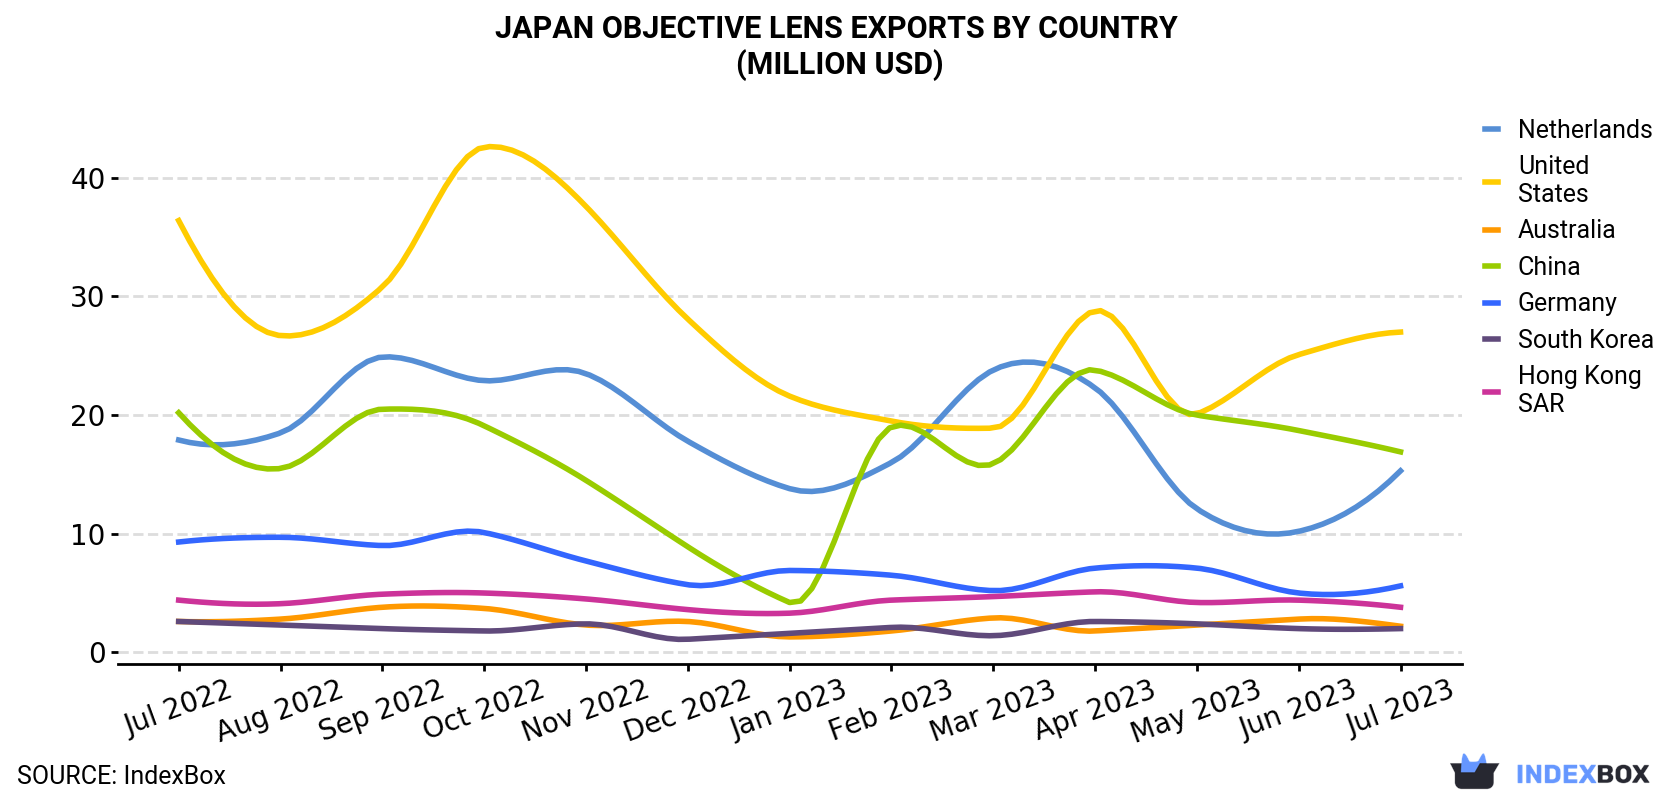 Japan Objective Lens Exports By Country (Million USD)